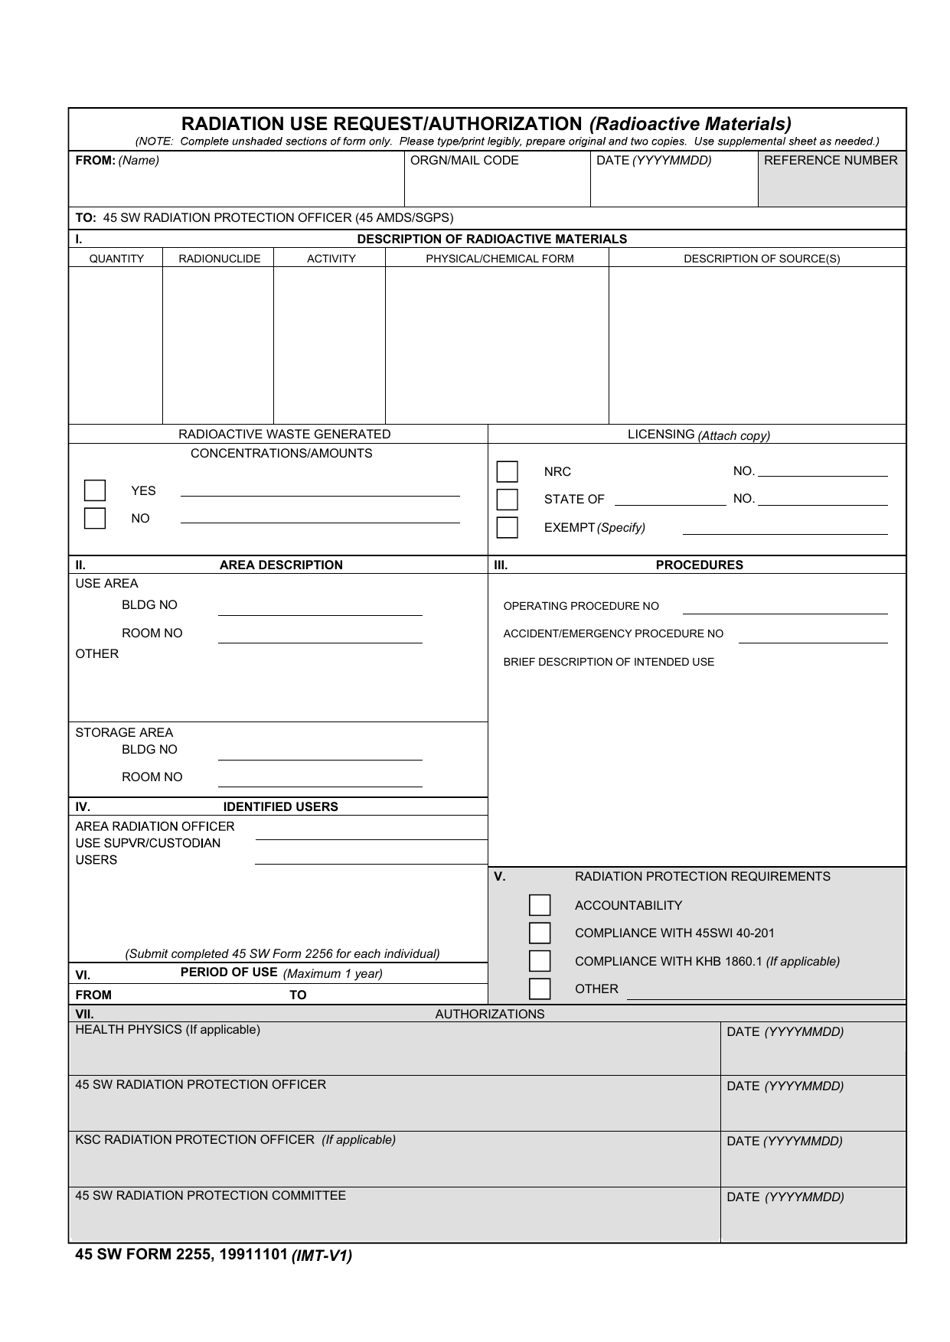 45 SW Form 2255 Radiation Use Request / Authorization (Radioactive Materials), Page 1